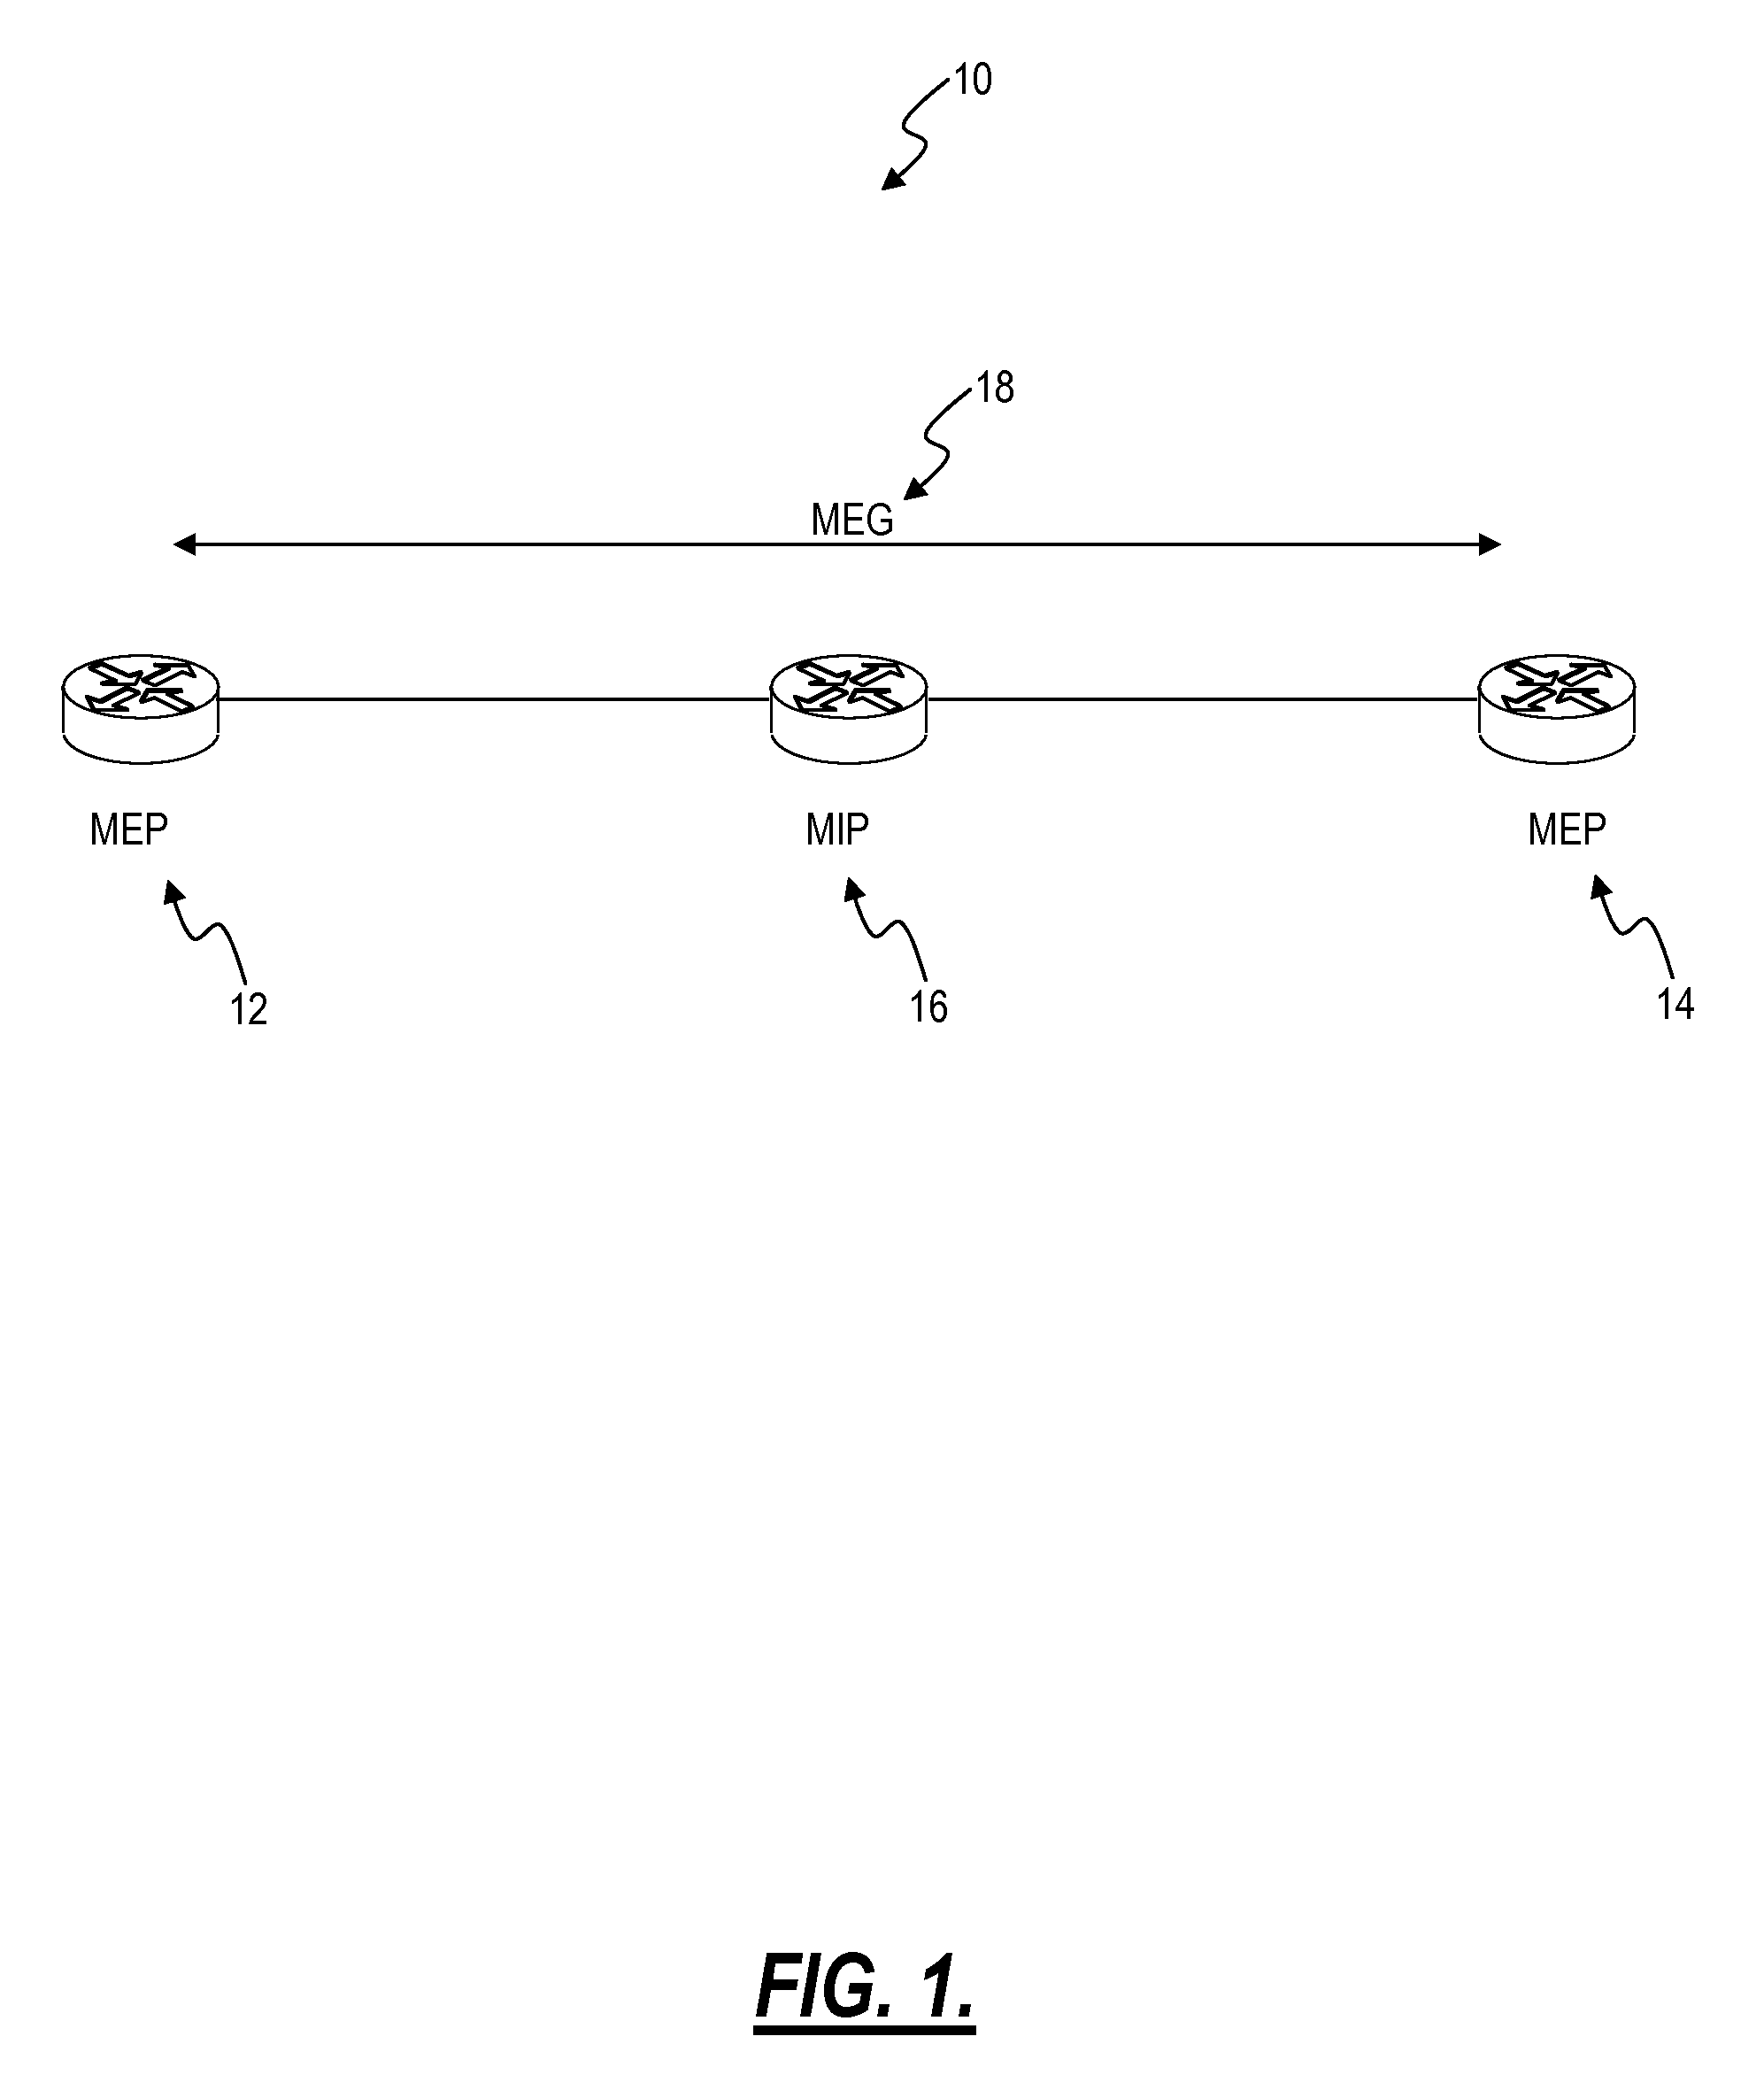 Systems and methods for scalable and rapid ethernet fault detection